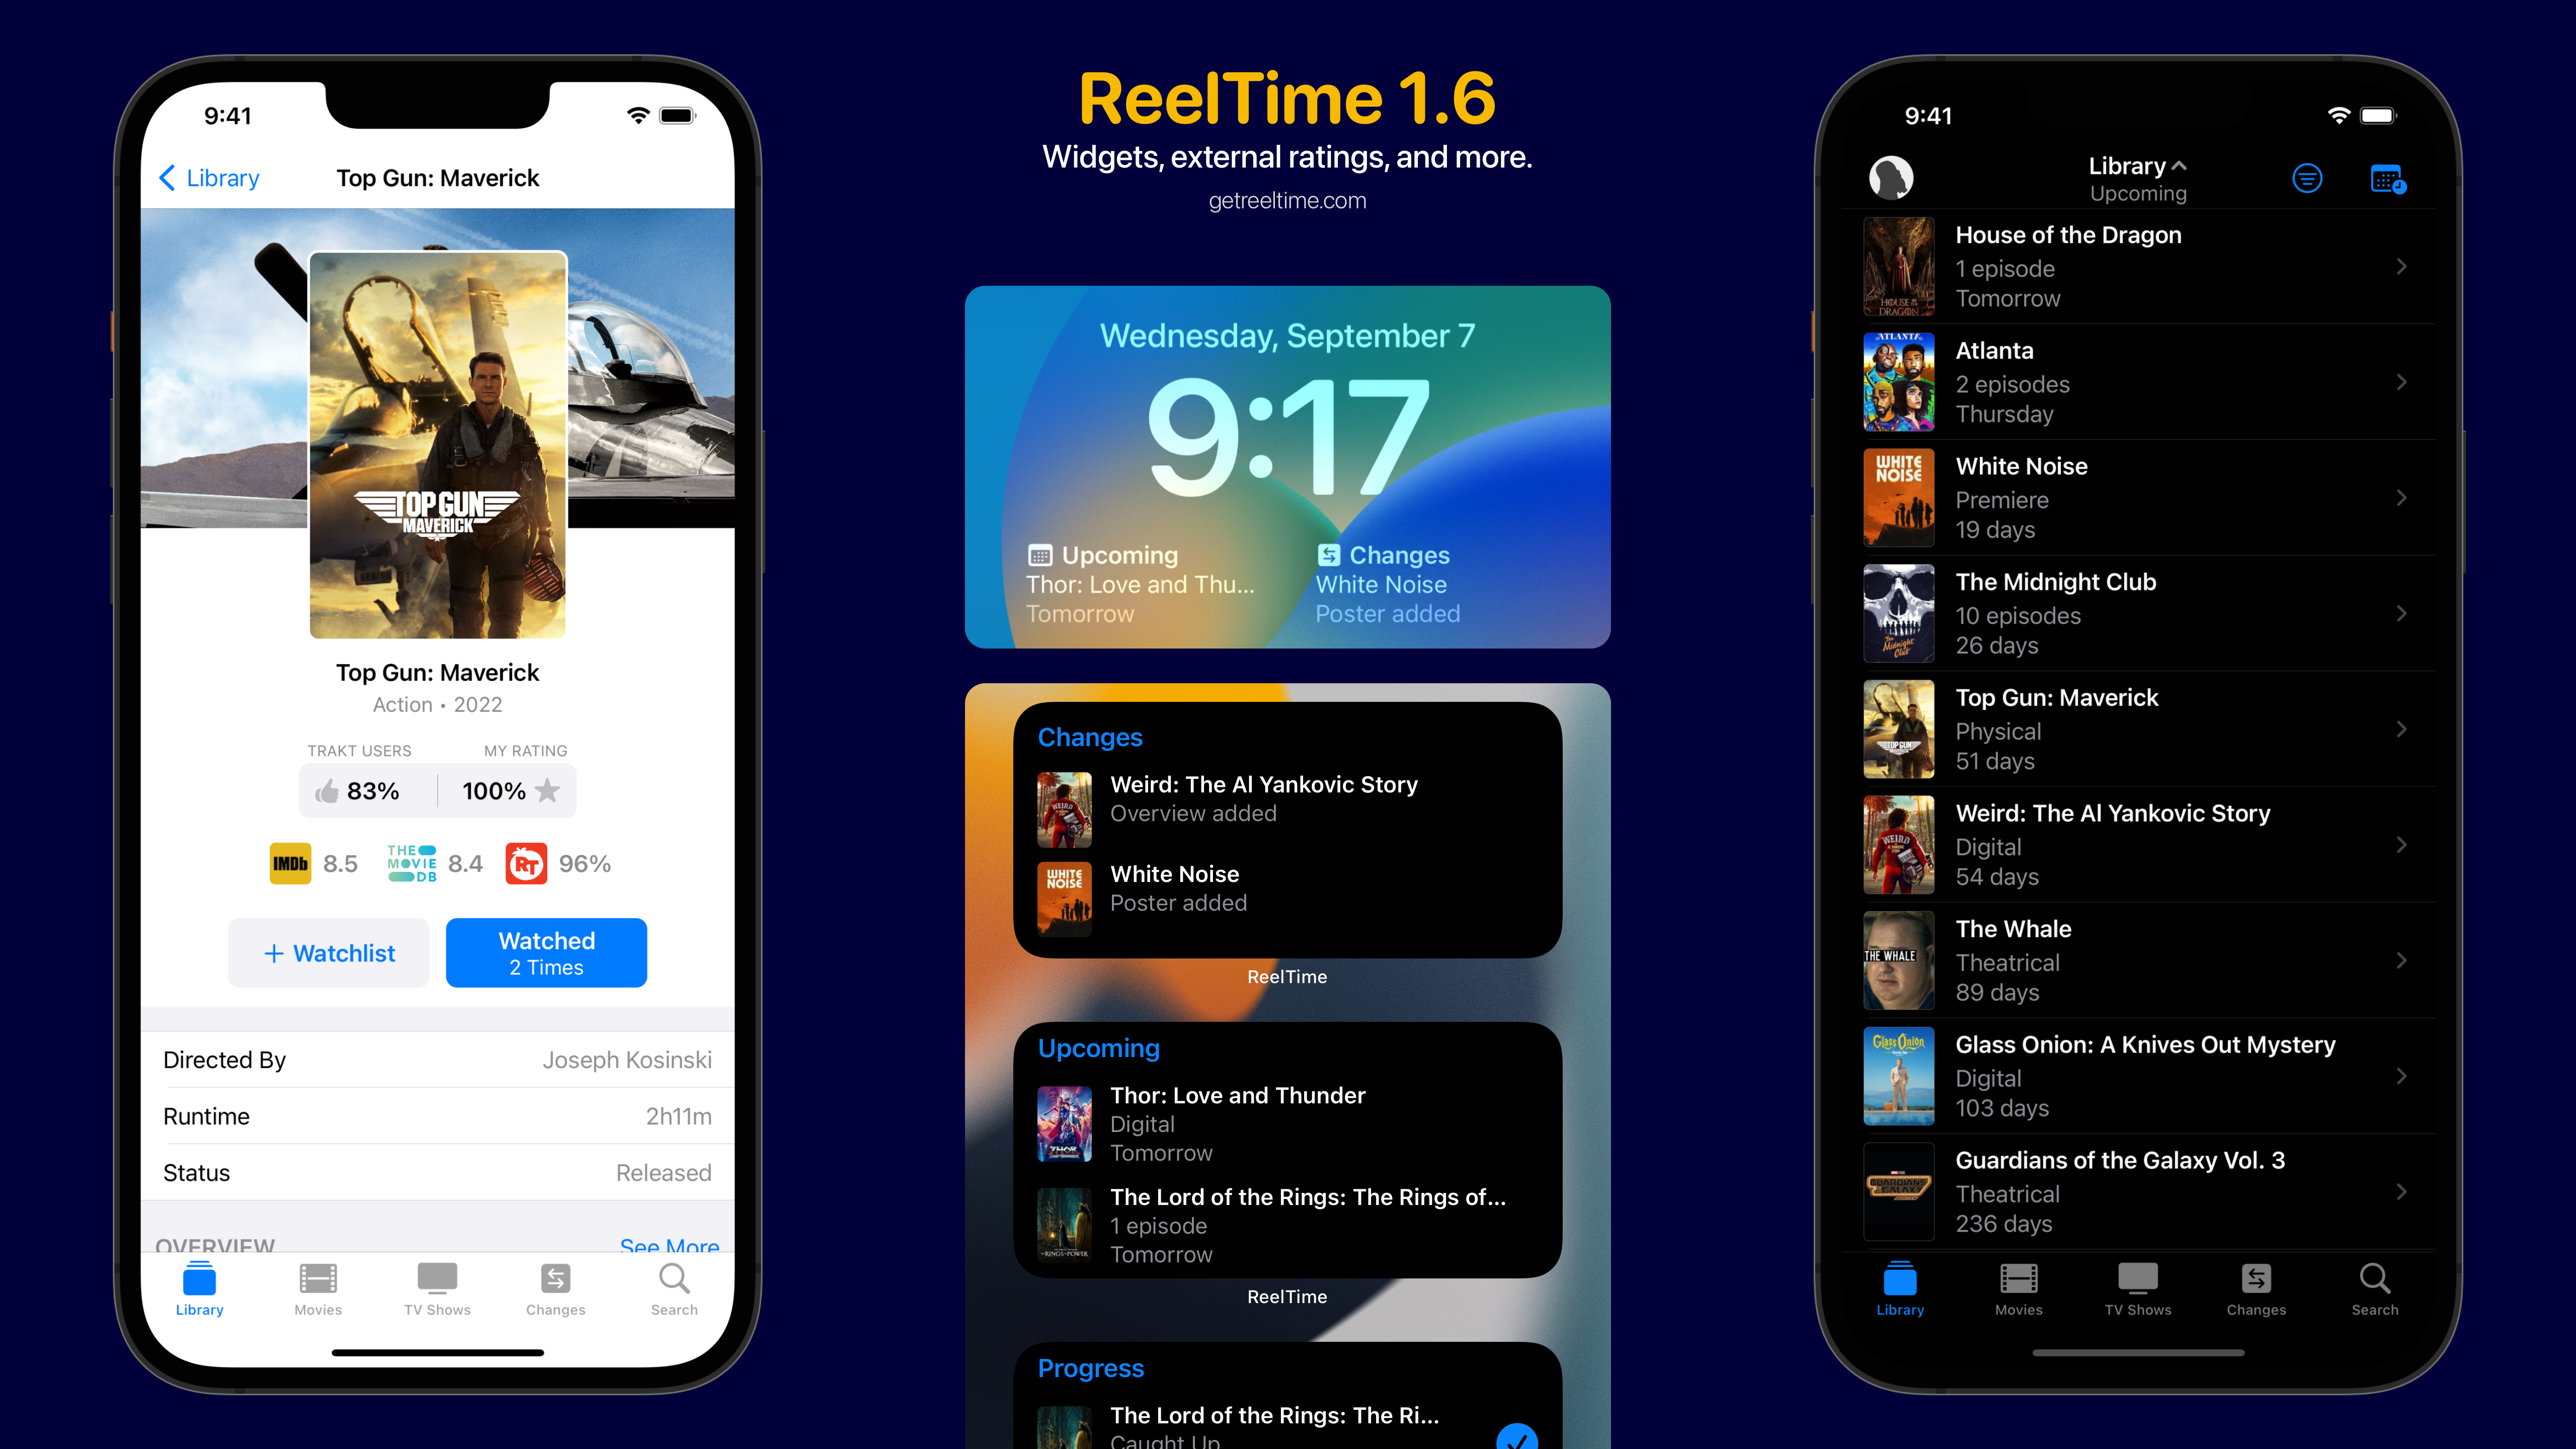 Movie and TV app ReelTime helps you track your viewing, check ratings and more